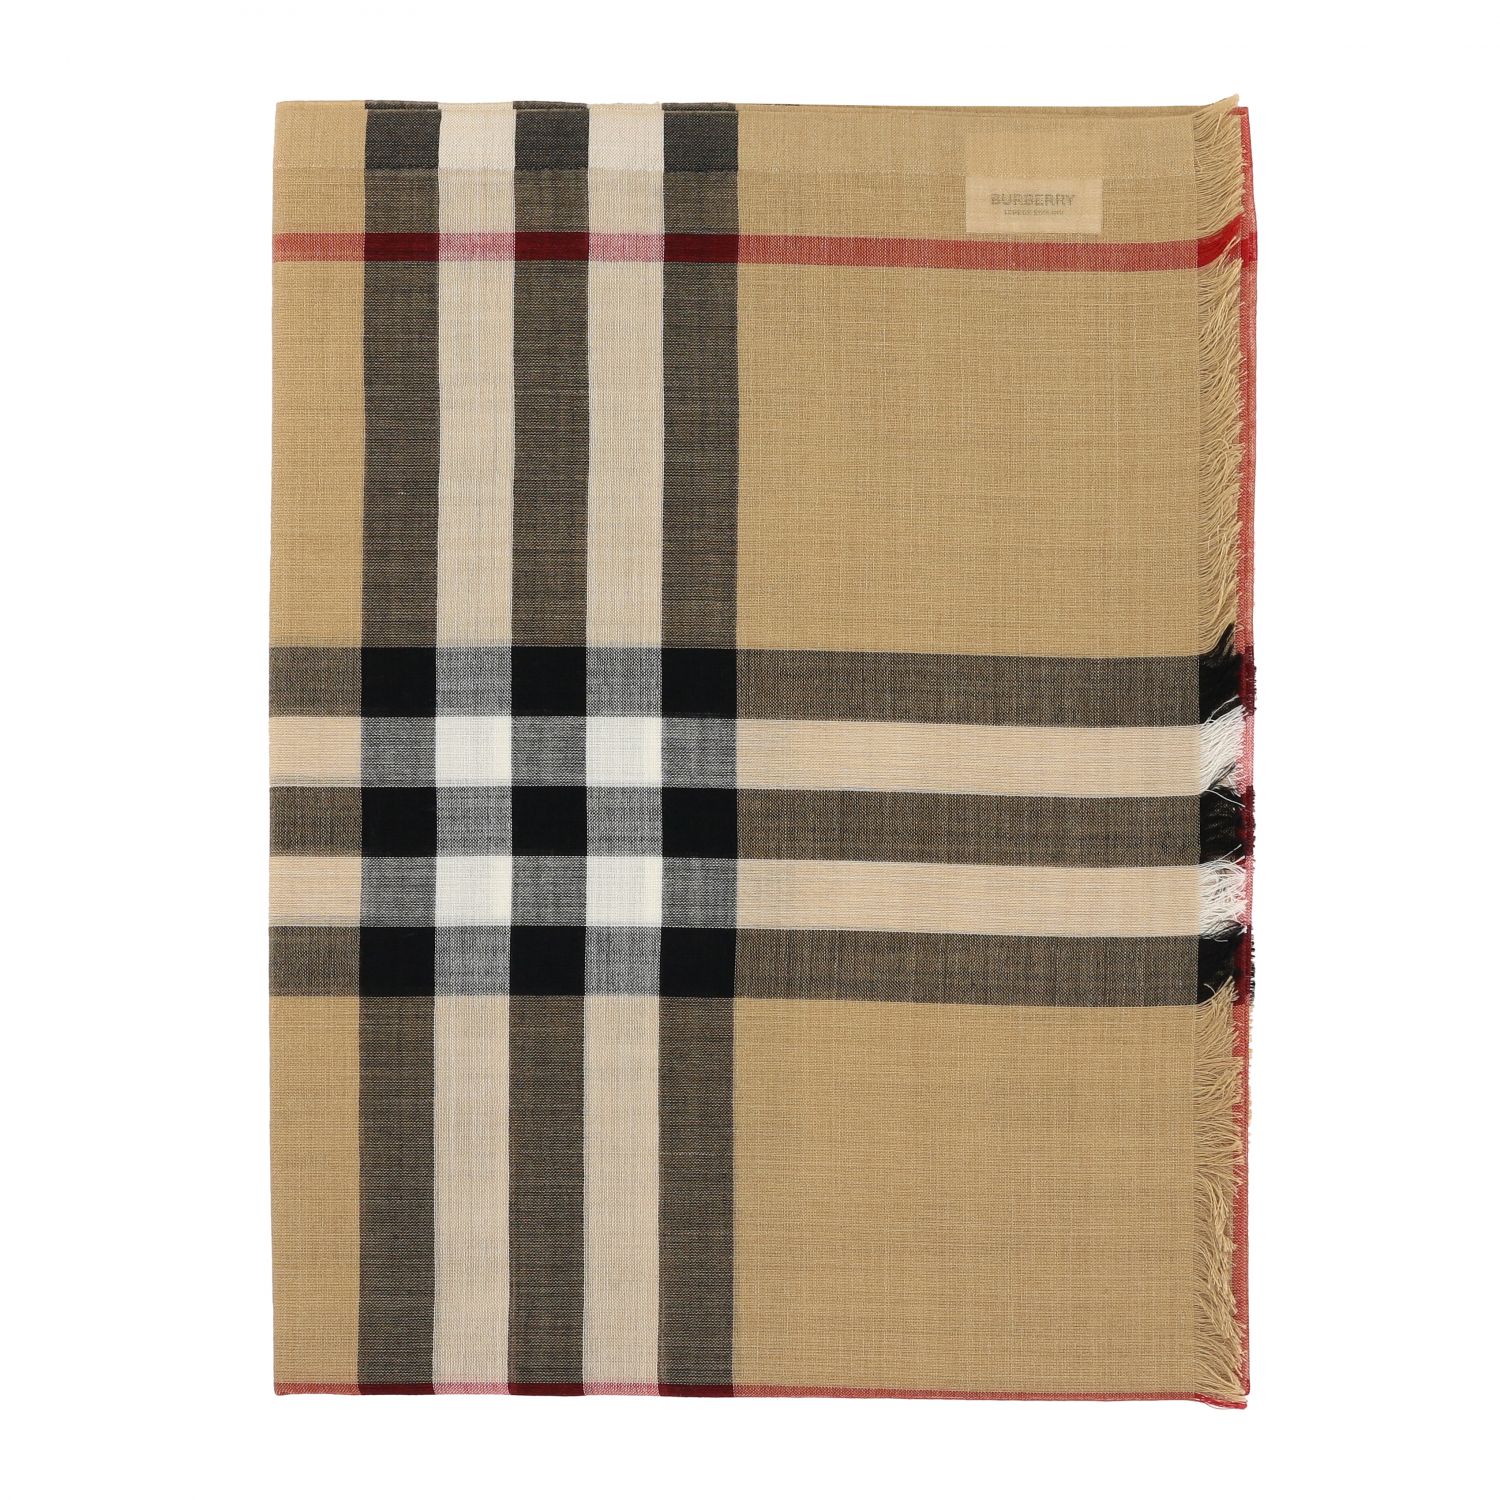 Burberry Outlet: scarf with check pattern - Multicolor | Burberry scarf ...